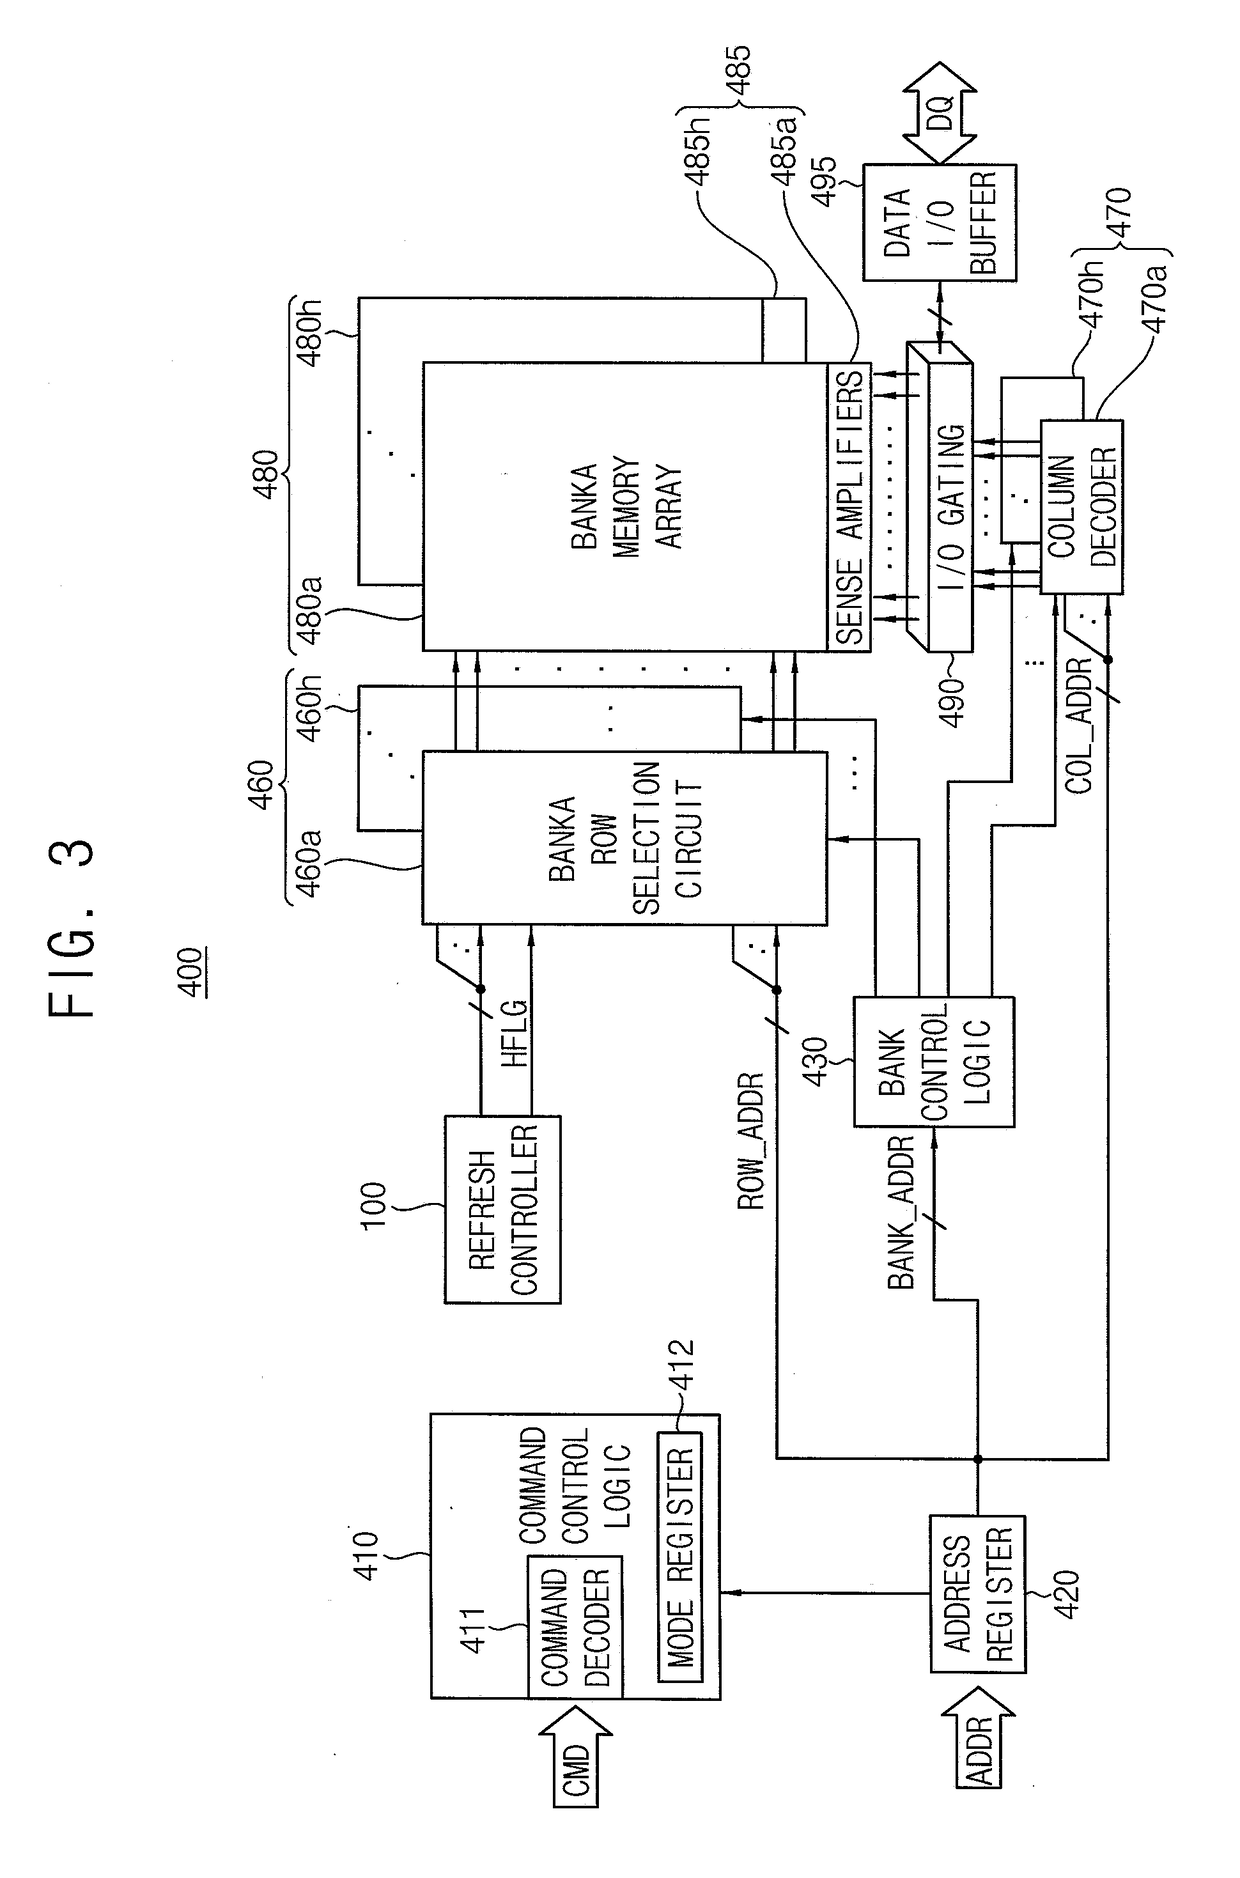 Memory device performing hammer refresh operation and memory system including the same